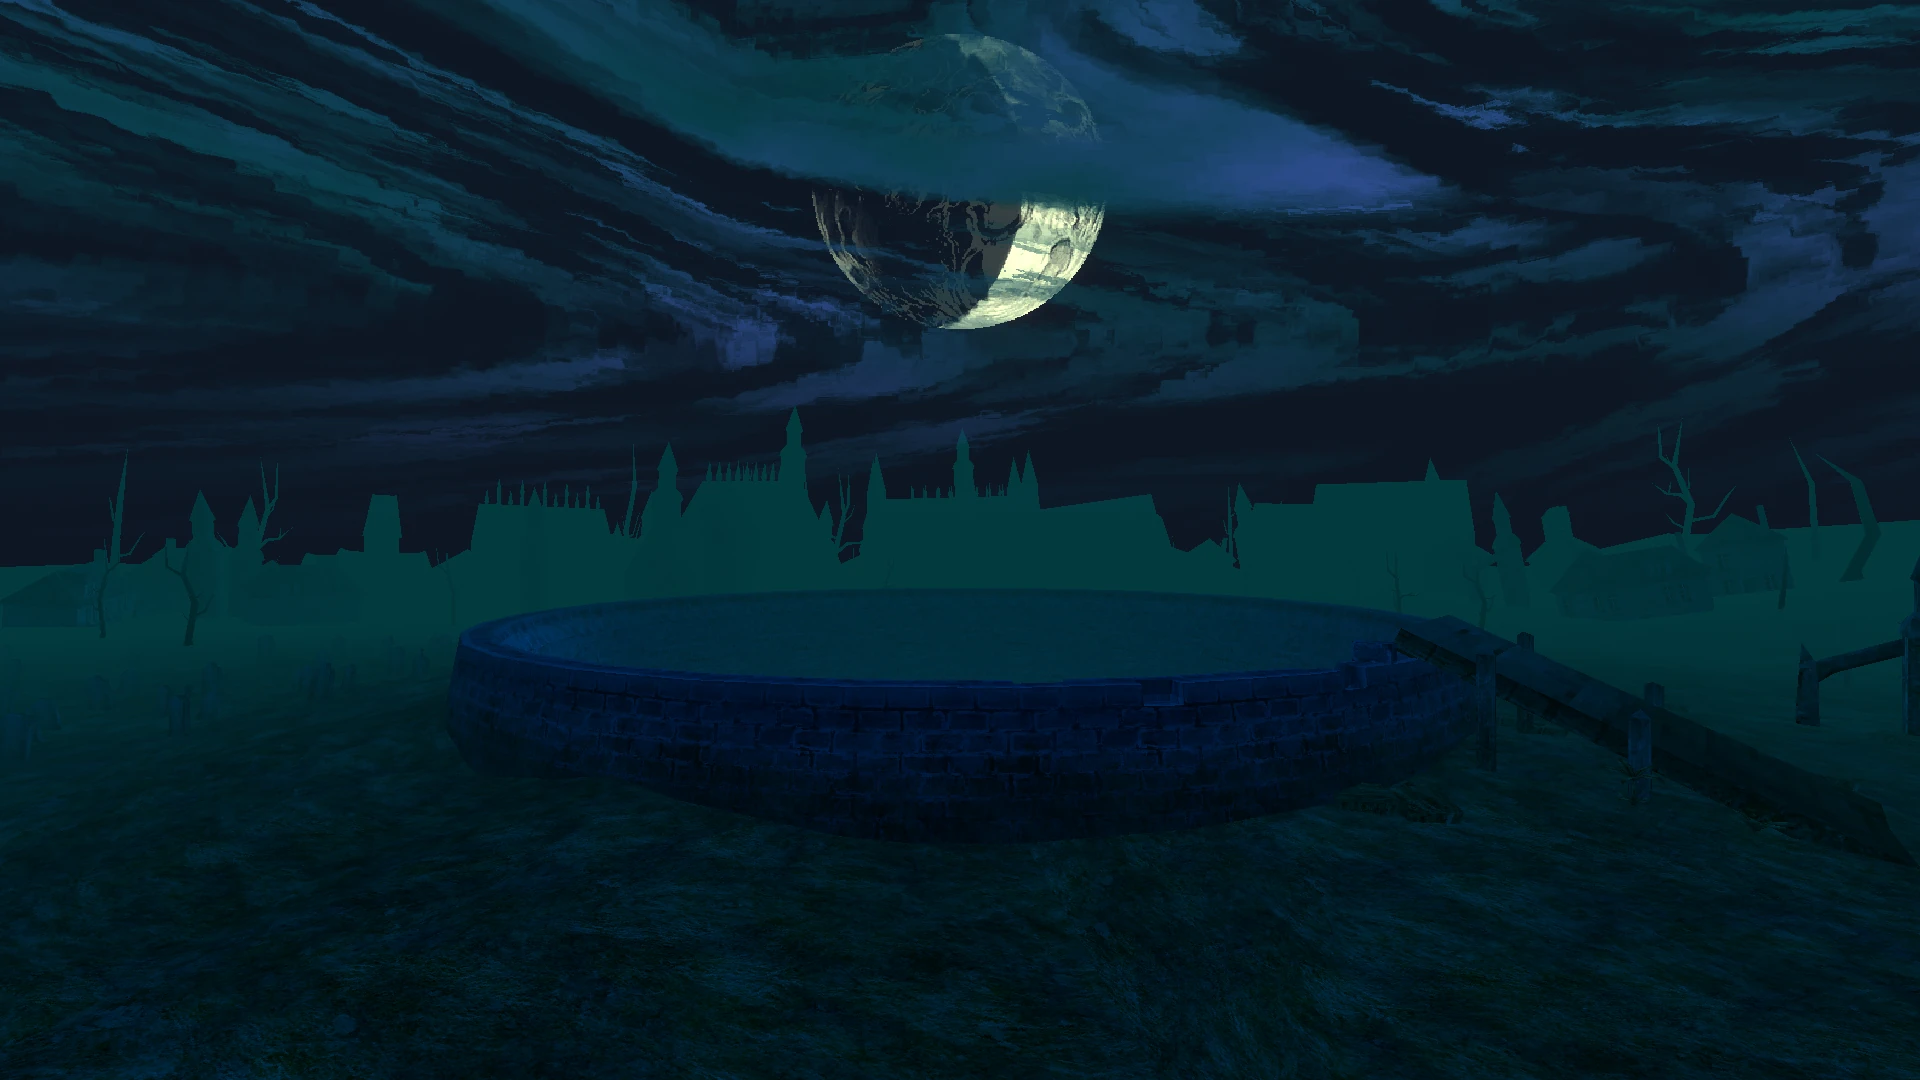 An image from the opening game of the moon hanging ominously above the Great Well.